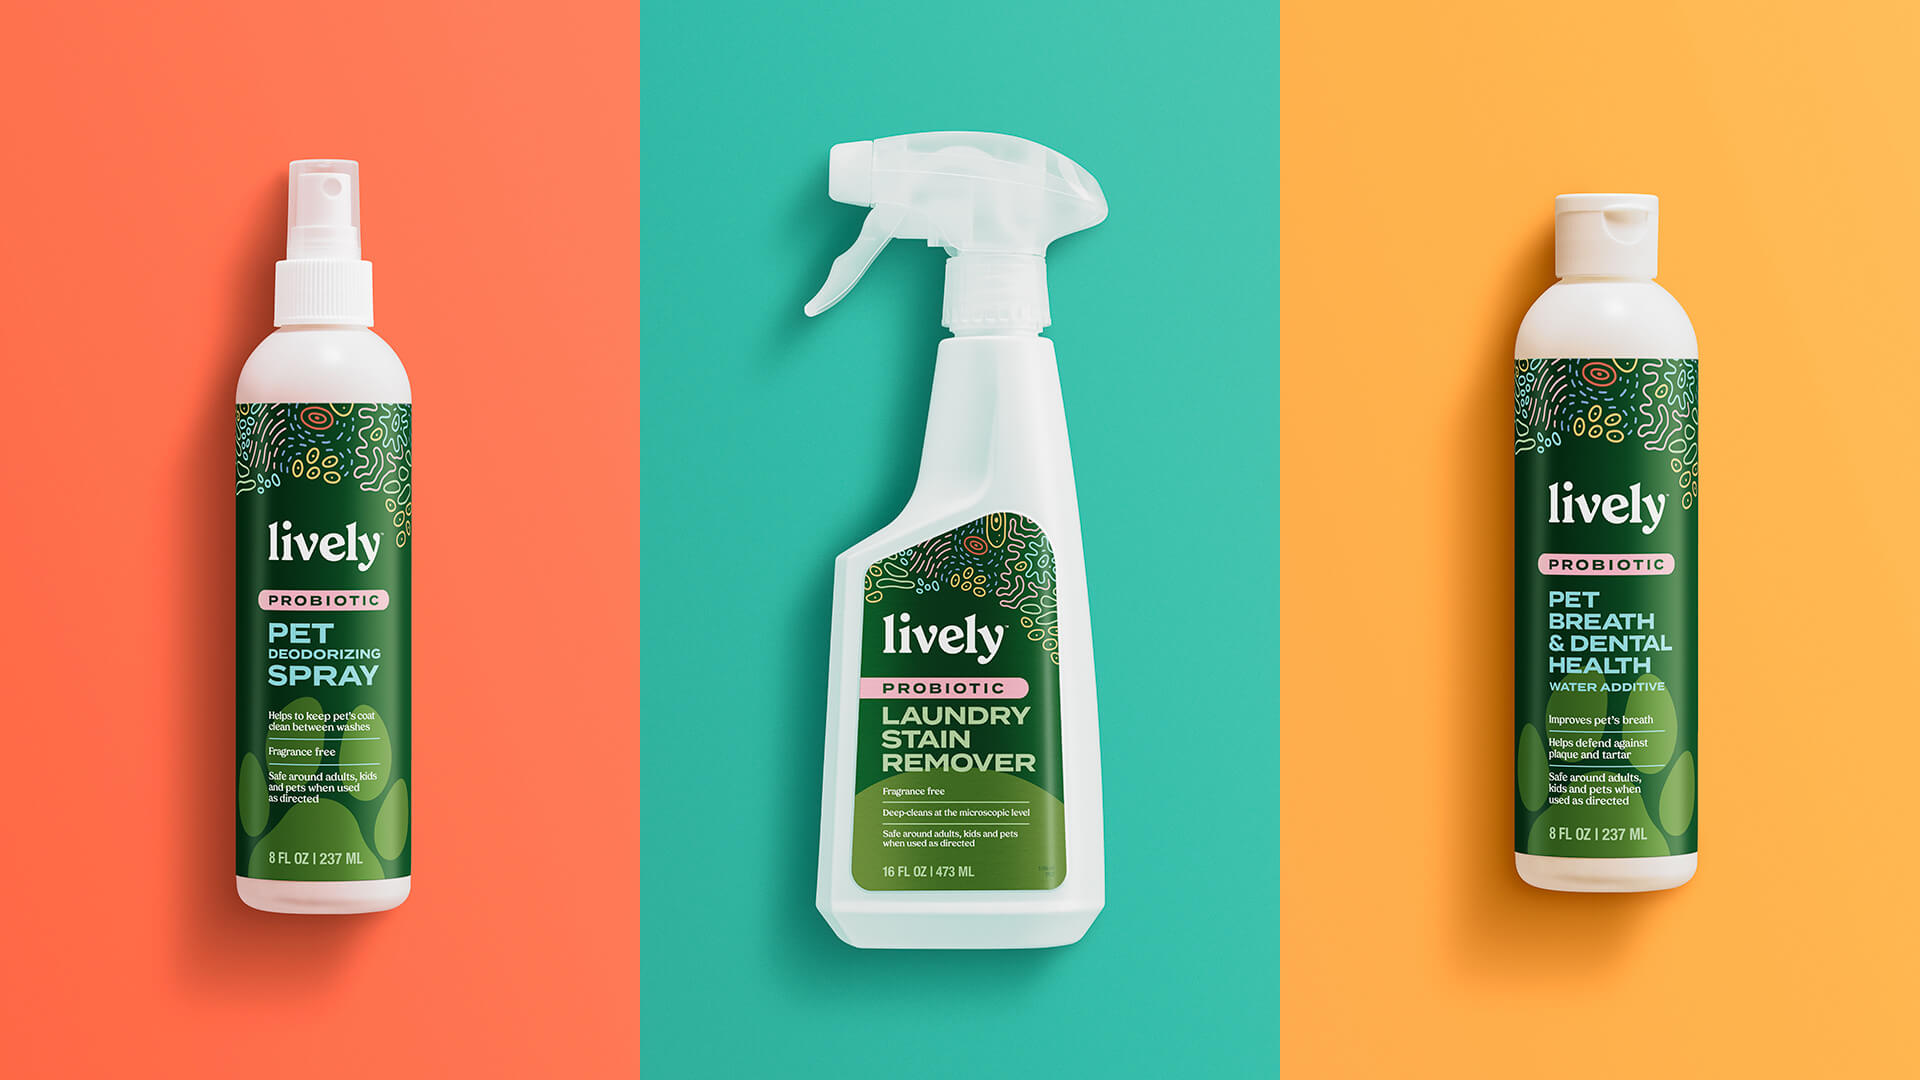 Three Lively products lined up on different color backgrounds: Pet Spray, Laundry Stain Remover and Pet Breath & Dental Health Water Additive